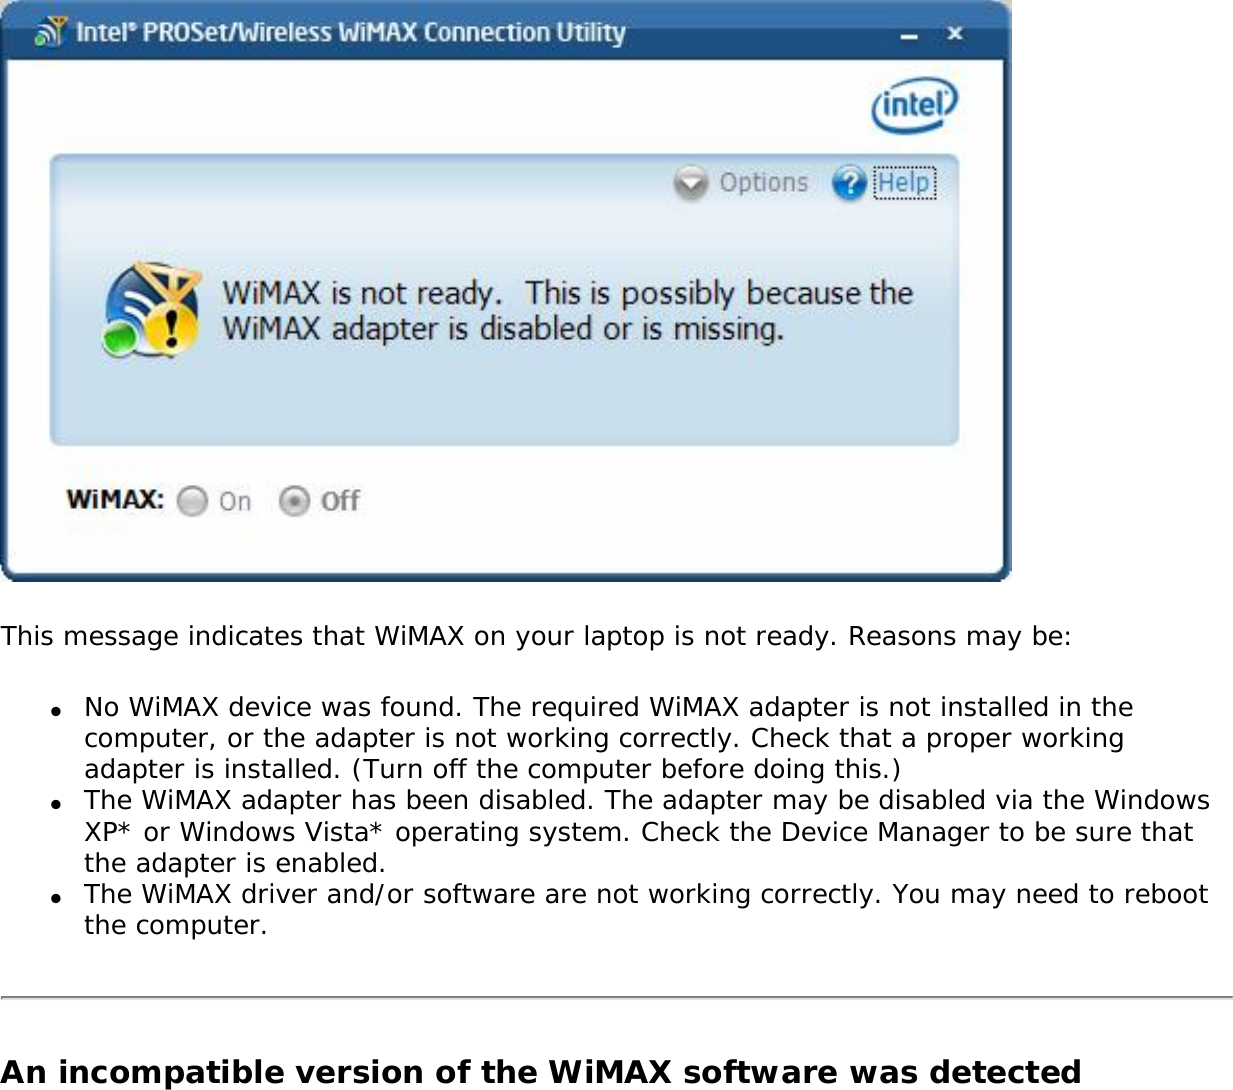 This message indicates that WiMAX on your laptop is not ready. Reasons may be:●     No WiMAX device was found. The required WiMAX adapter is not installed in the computer, or the adapter is not working correctly. Check that a proper working adapter is installed. (Turn off the computer before doing this.) ●     The WiMAX adapter has been disabled. The adapter may be disabled via the Windows XP* or Windows Vista* operating system. Check the Device Manager to be sure that the adapter is enabled.●     The WiMAX driver and/or software are not working correctly. You may need to reboot the computer.An incompatible version of the WiMAX software was detected